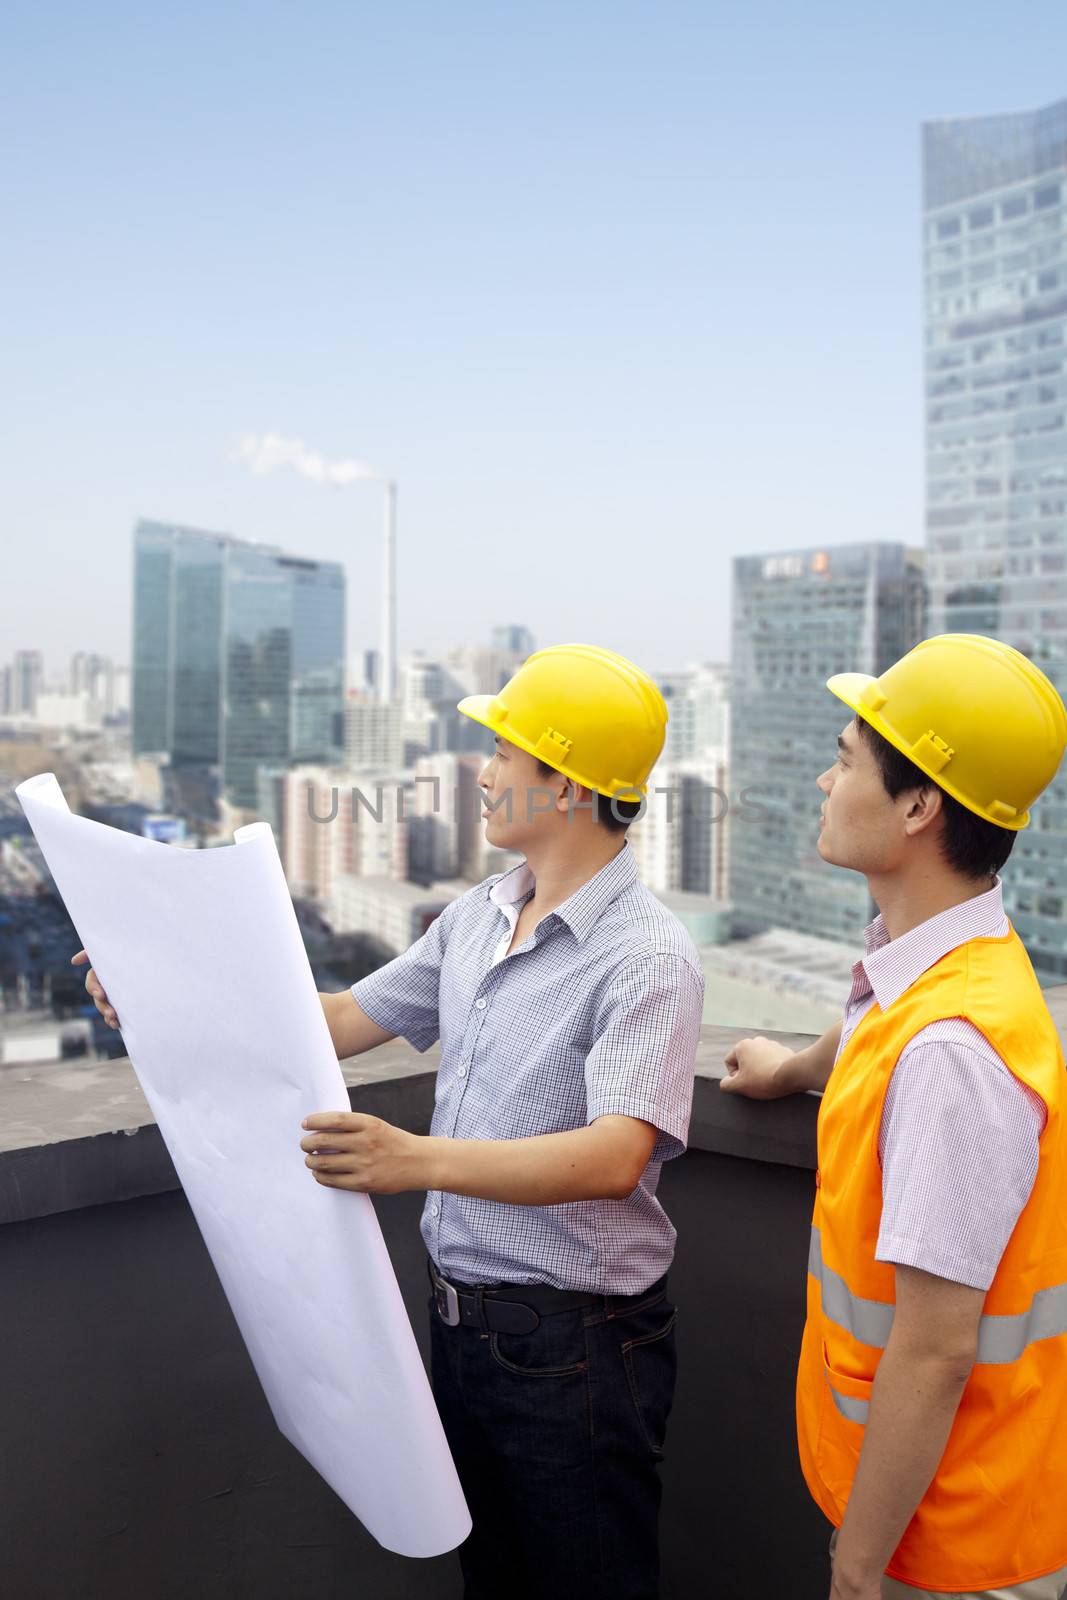 Architect And Construction Worker Talking On Rooftop